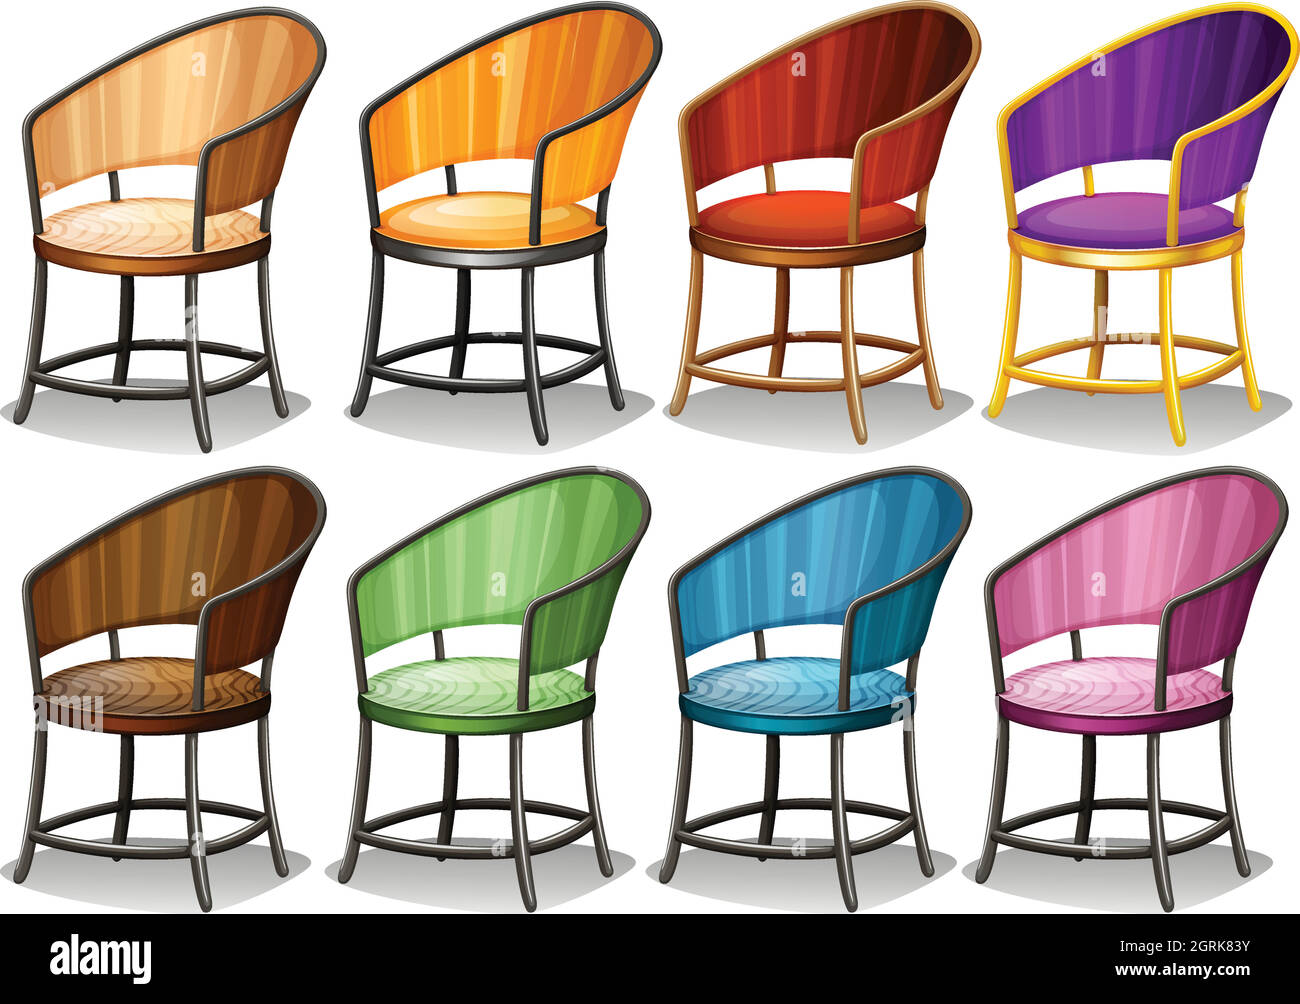 Chairs Stock Vector